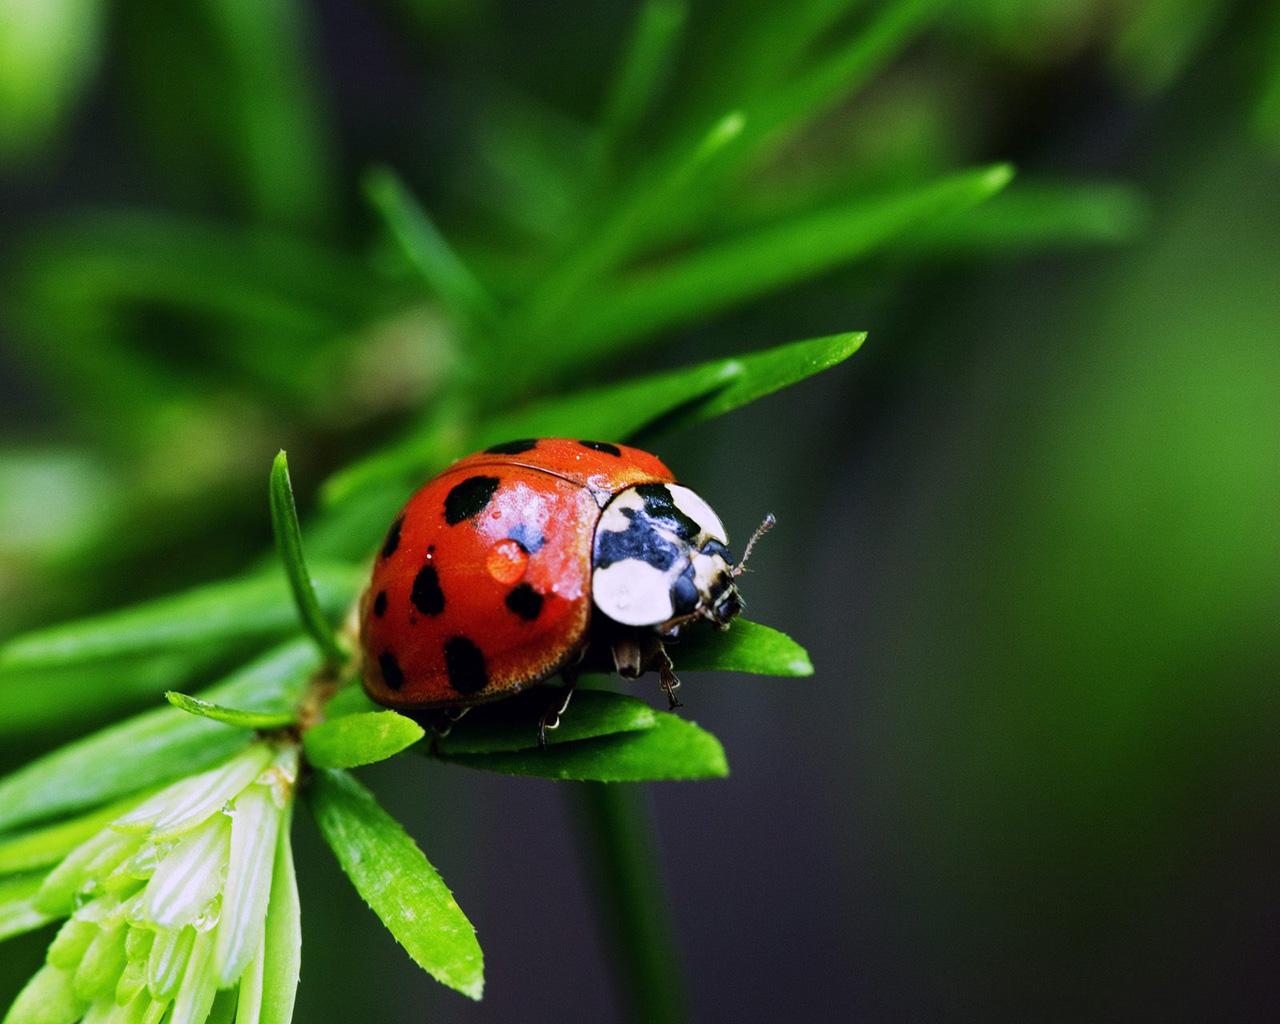 Very nice introduction to ladybugs by the University of Kentucky here, 